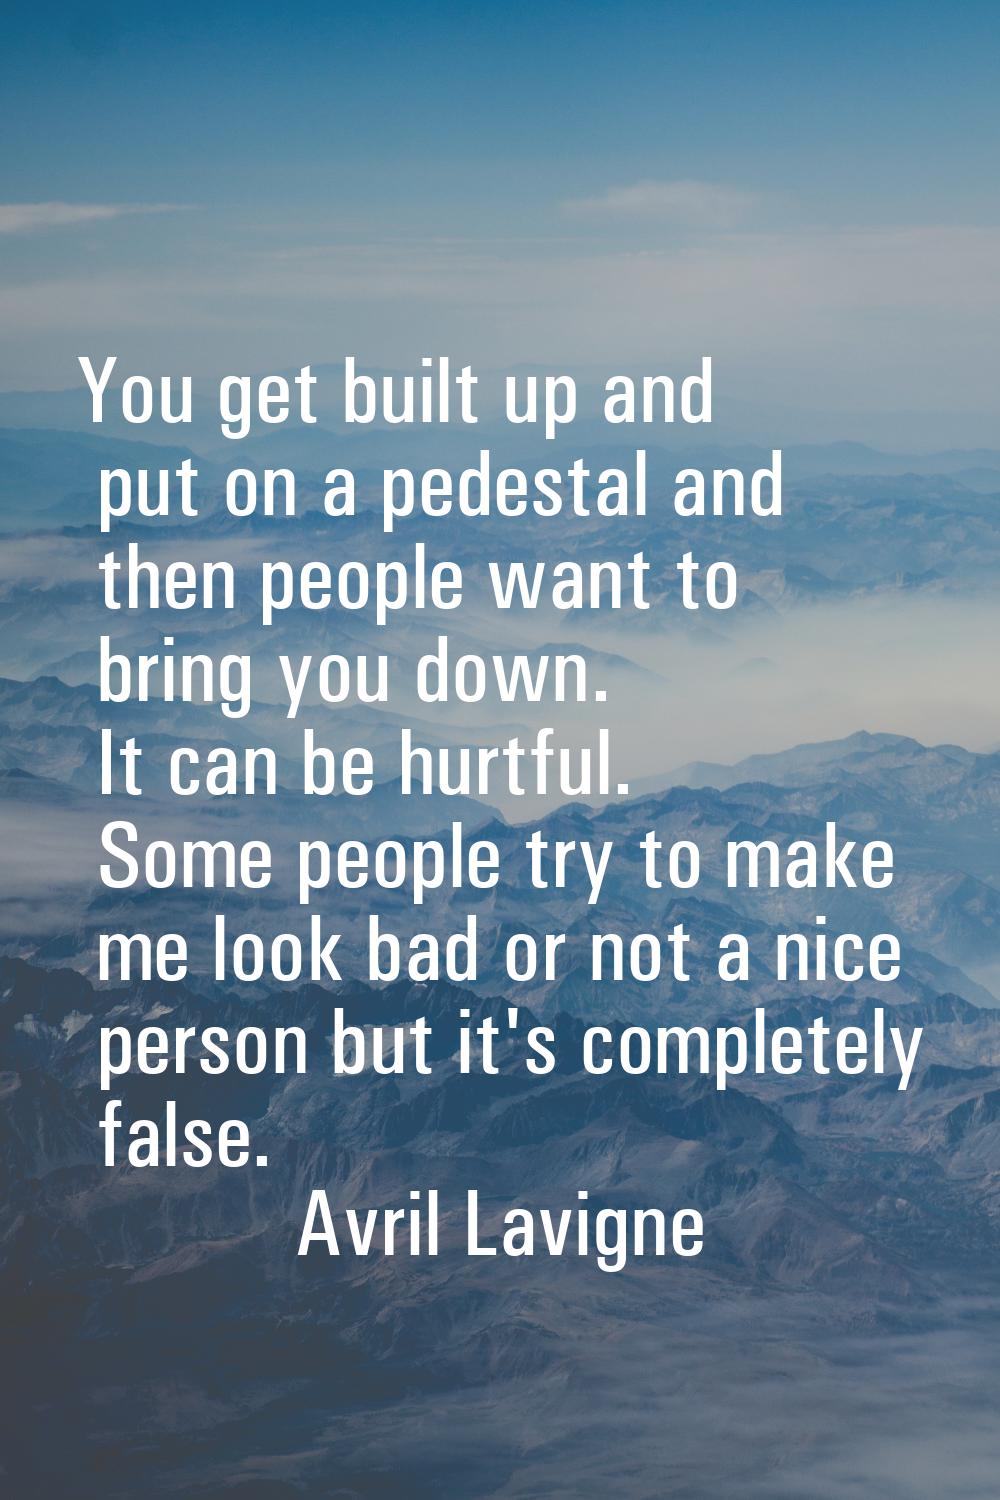 You get built up and put on a pedestal and then people want to bring you down. It can be hurtful. S